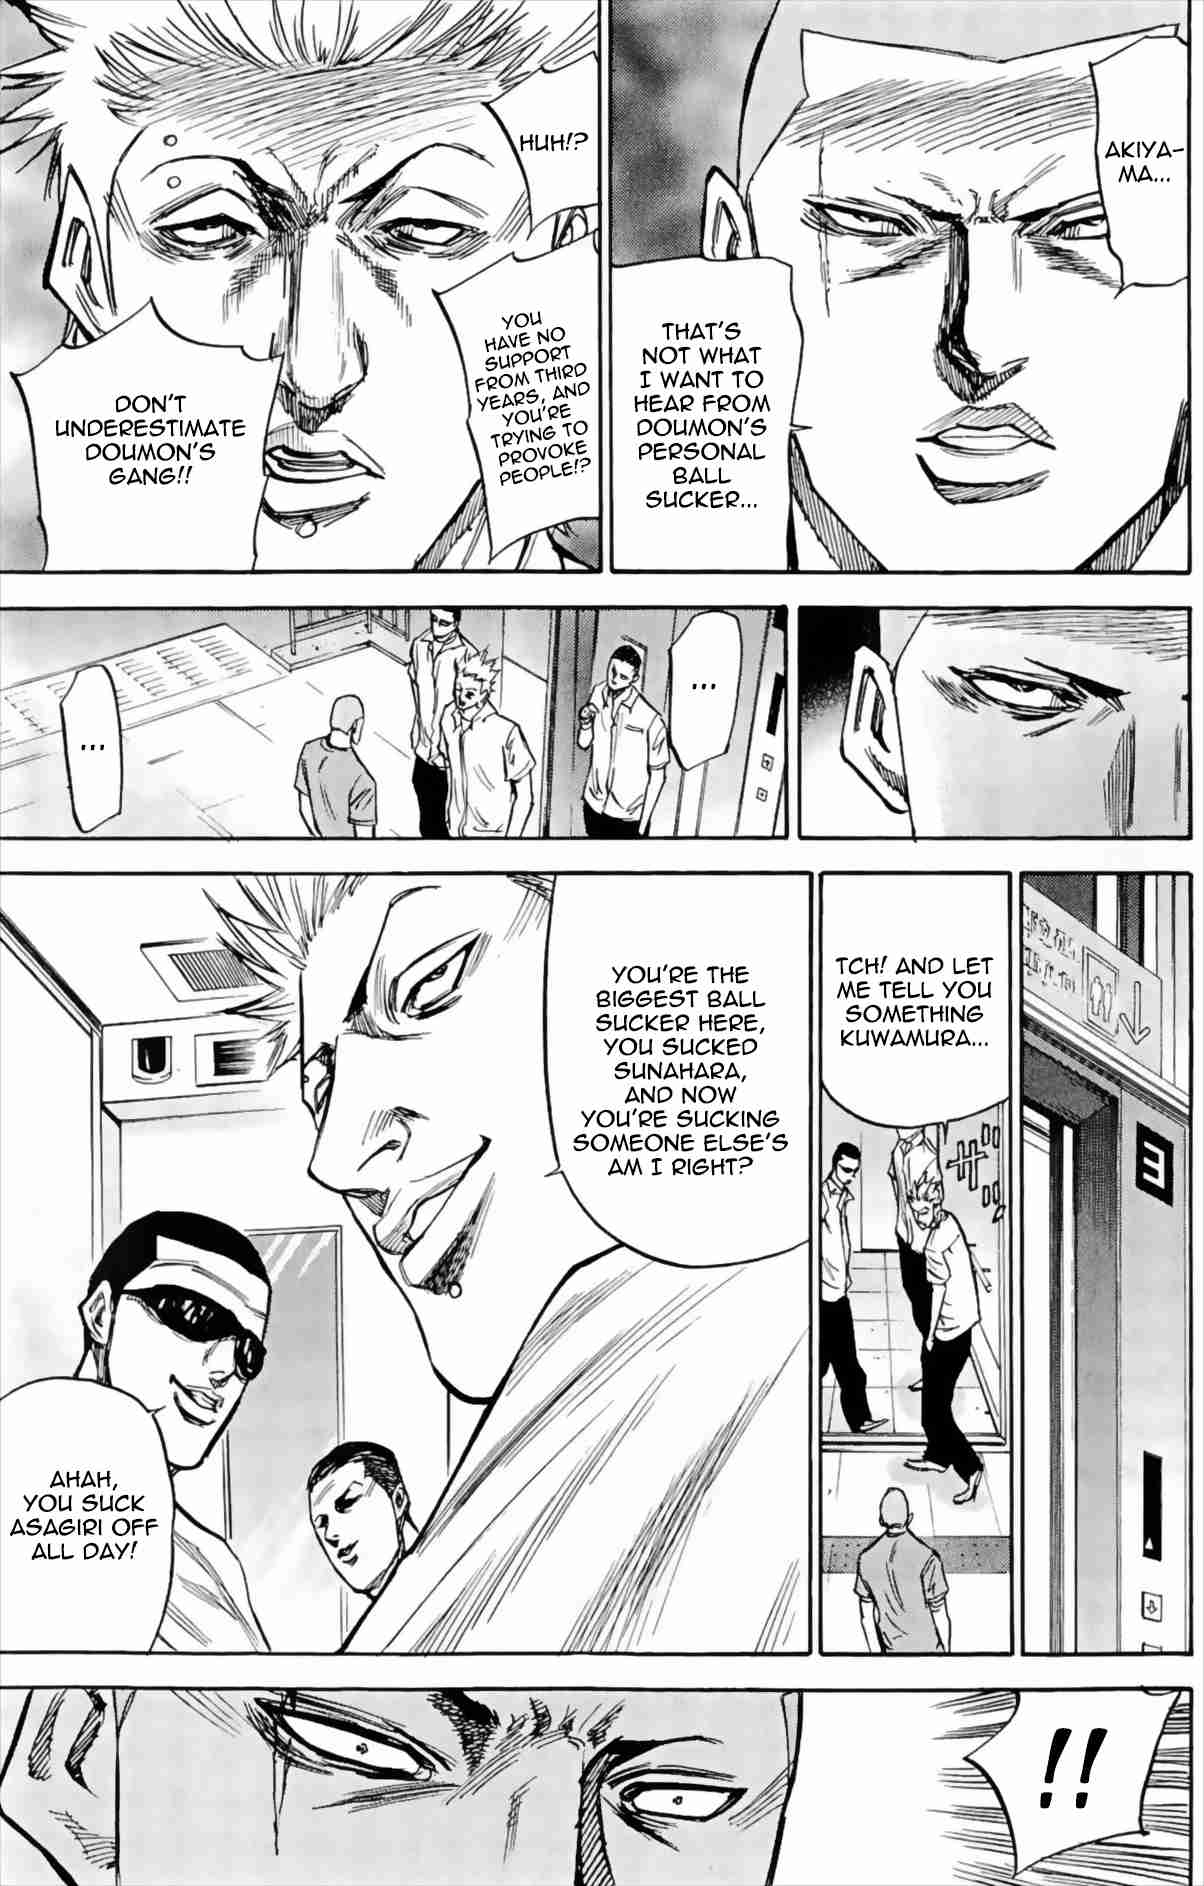 A bout! Vol. 6 Ch. 47 As expected, It's come to Nothing